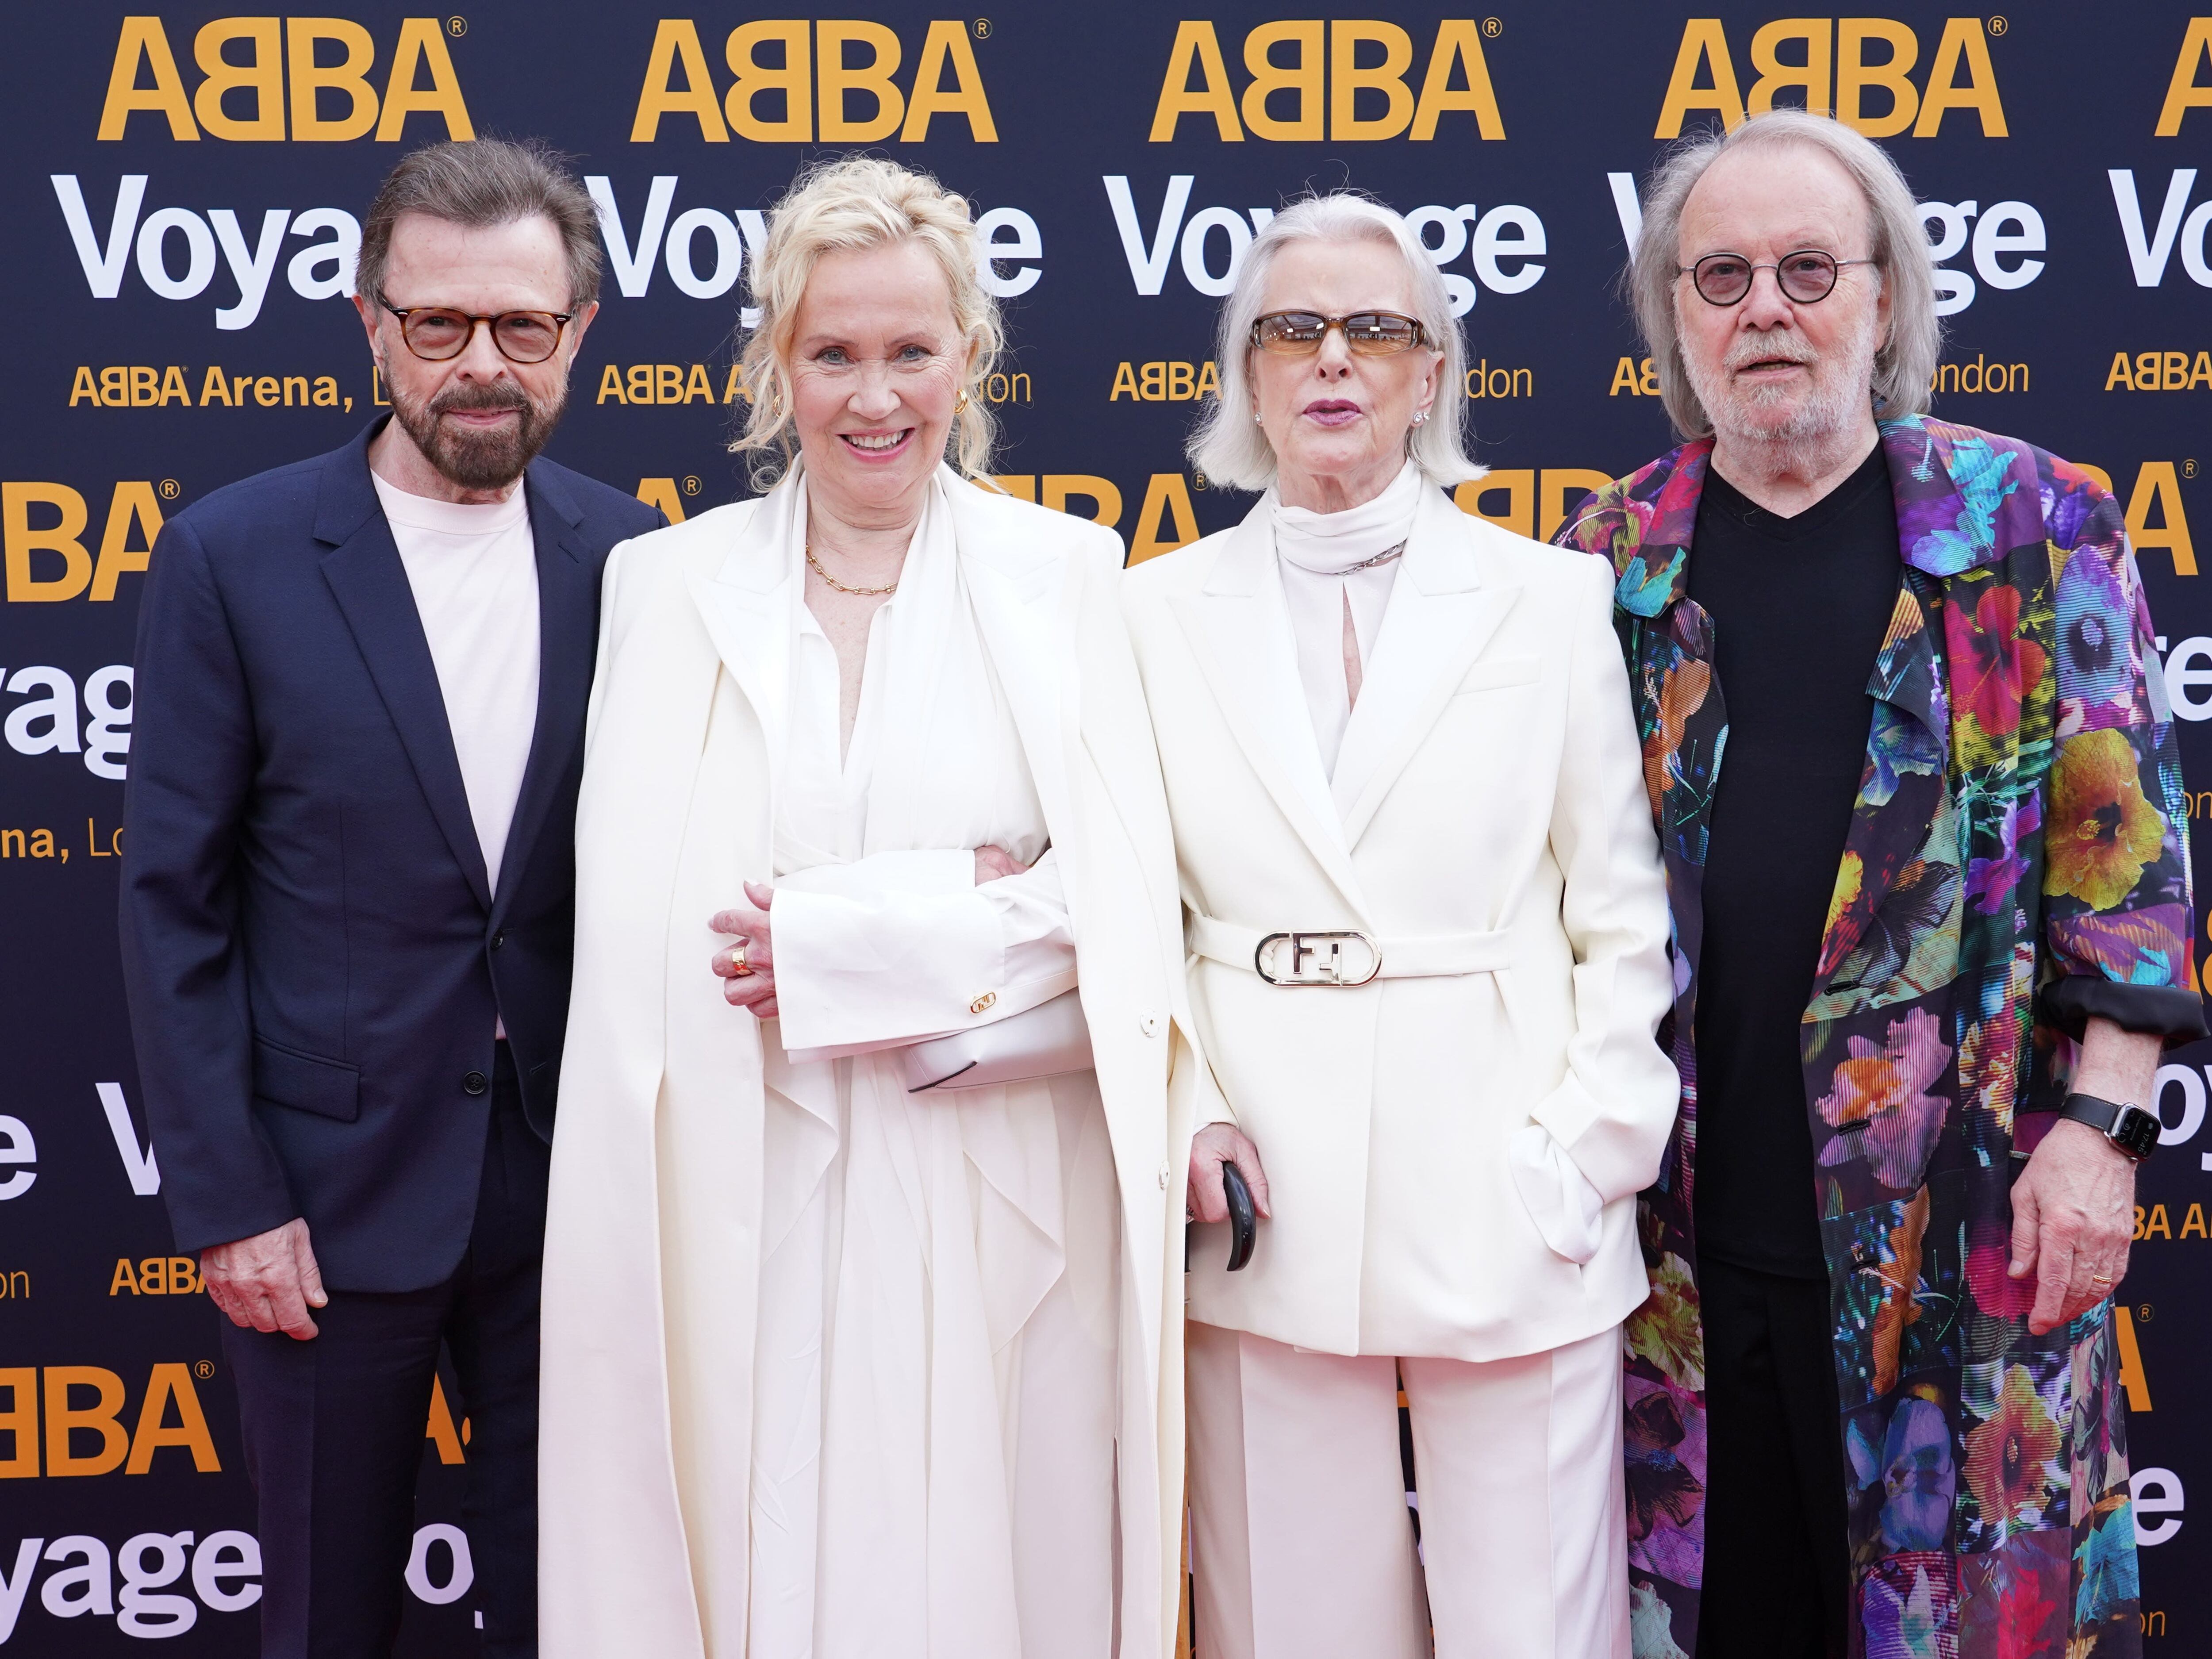 Public reunion of Abba members last month ‘might be the last occasion’